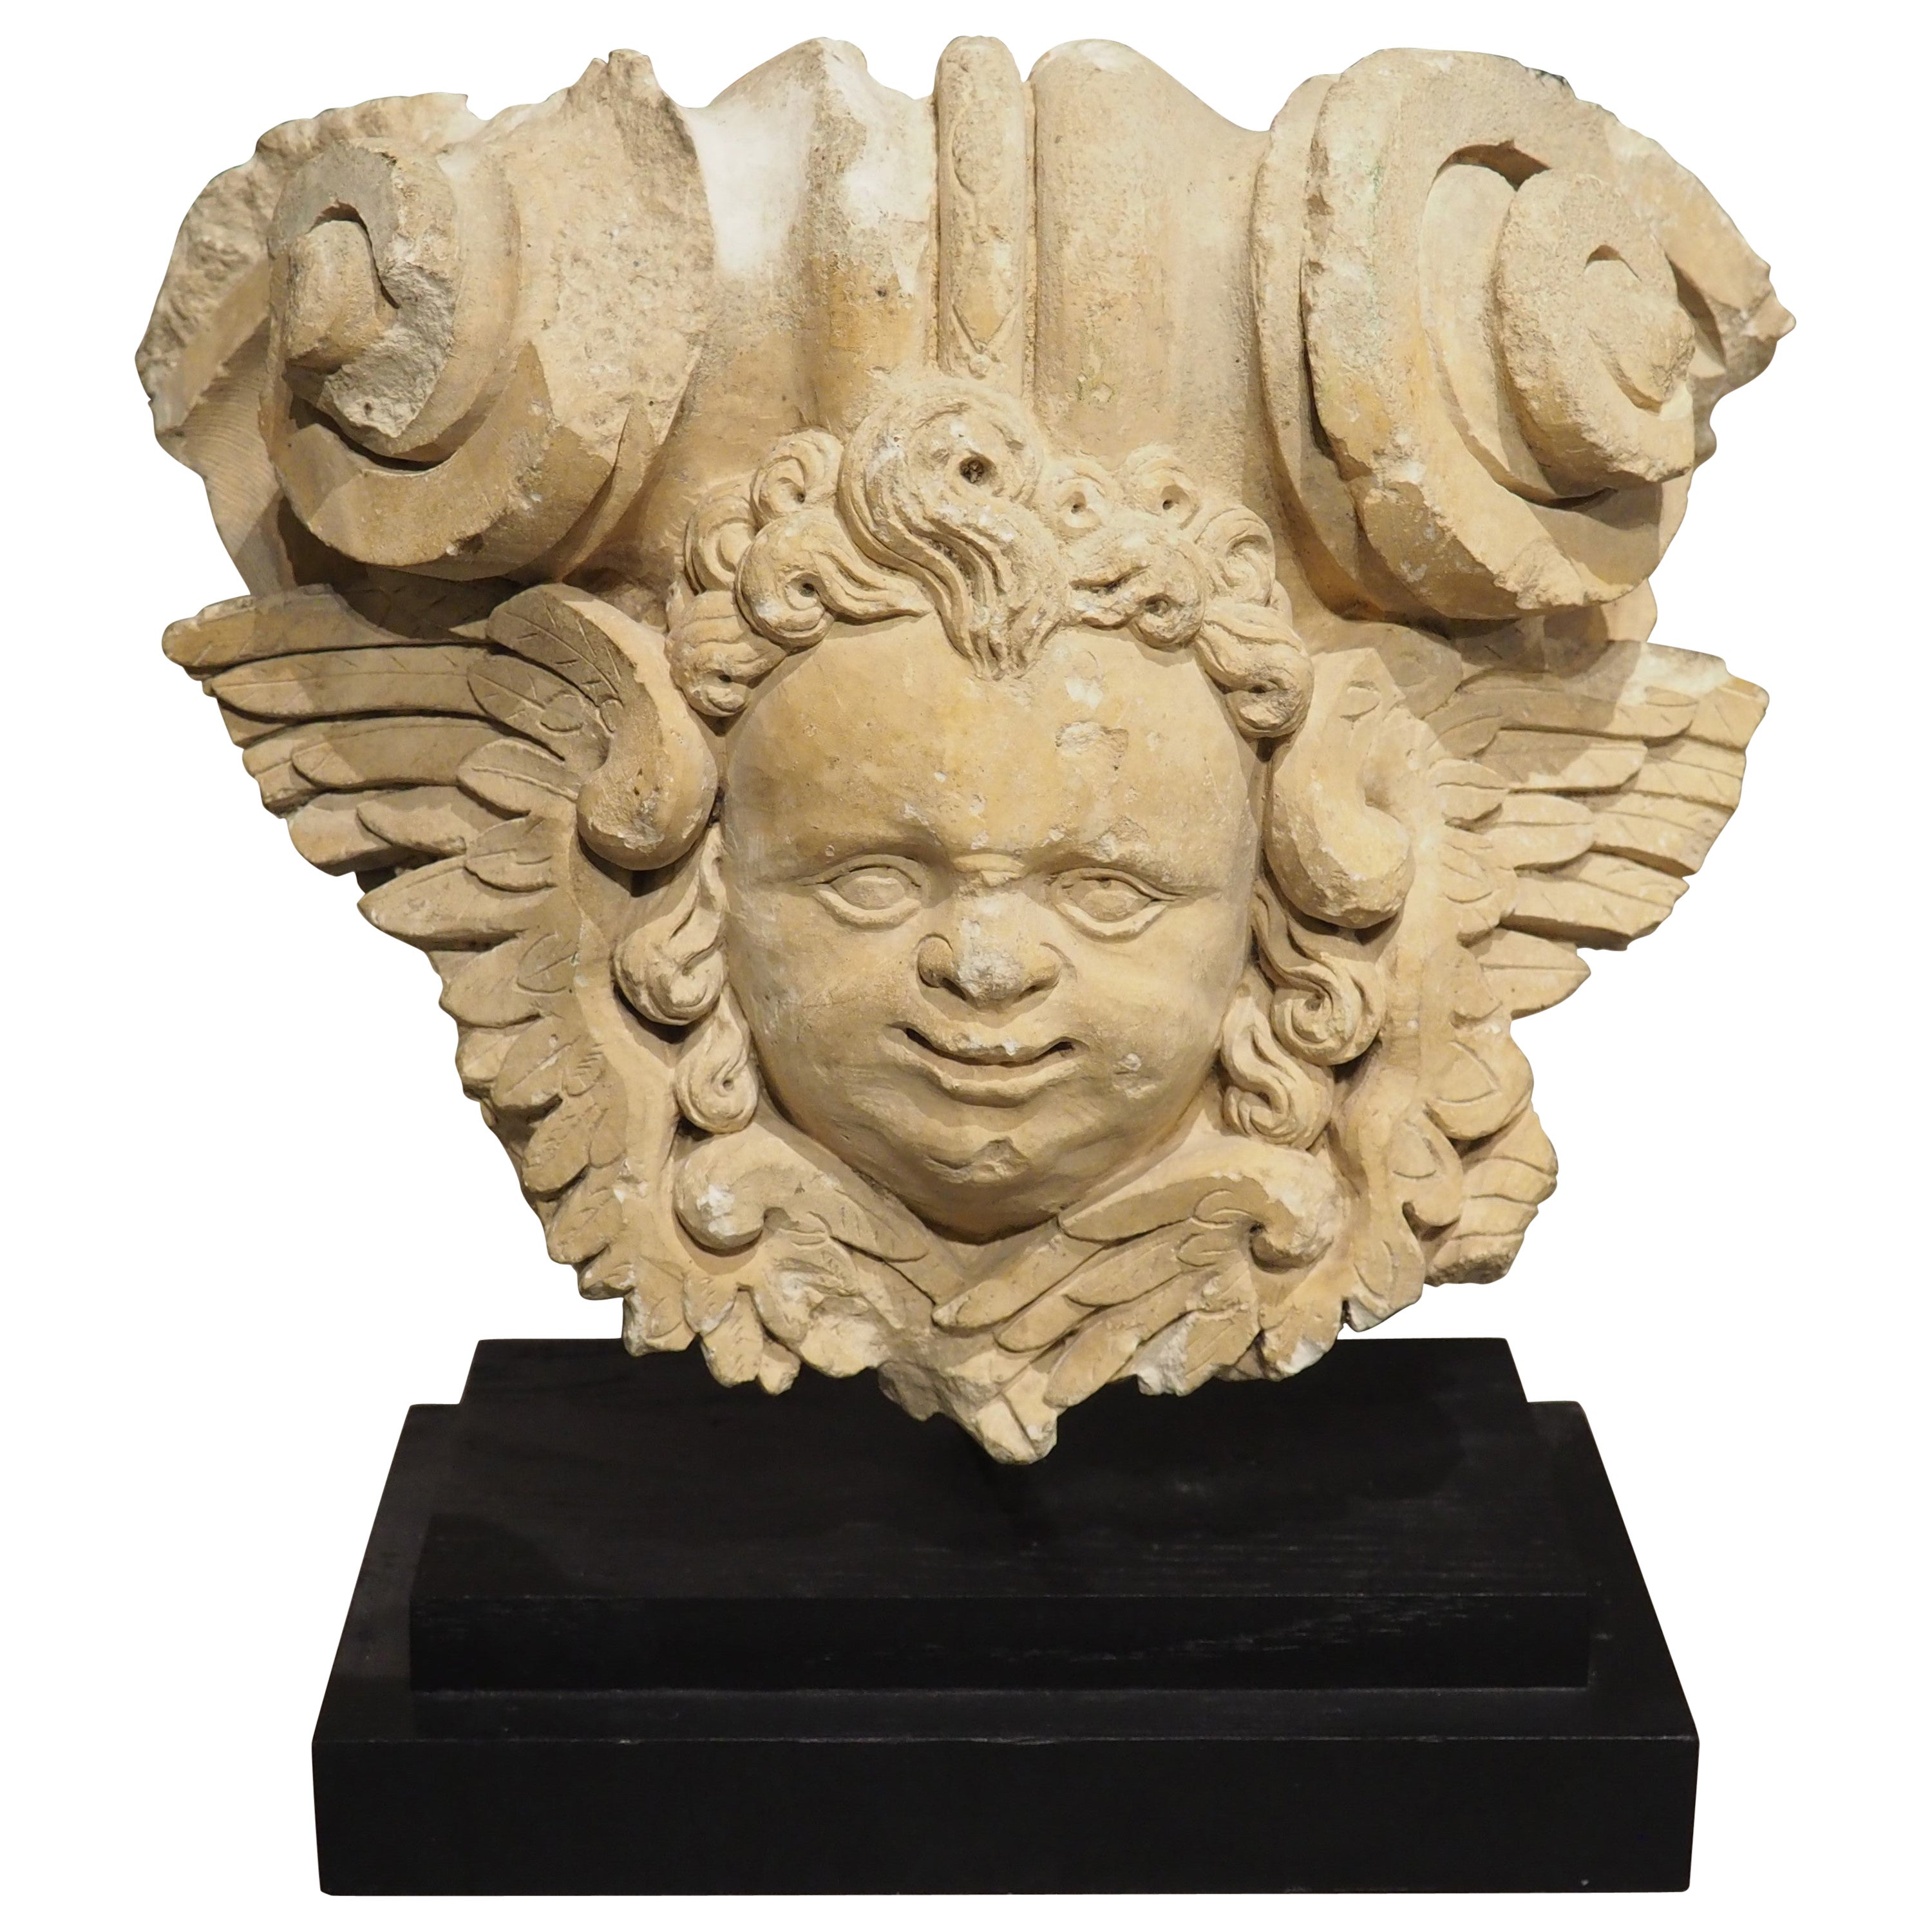 A 17th Century Mounted French Limestone Carving of a Winged Angel